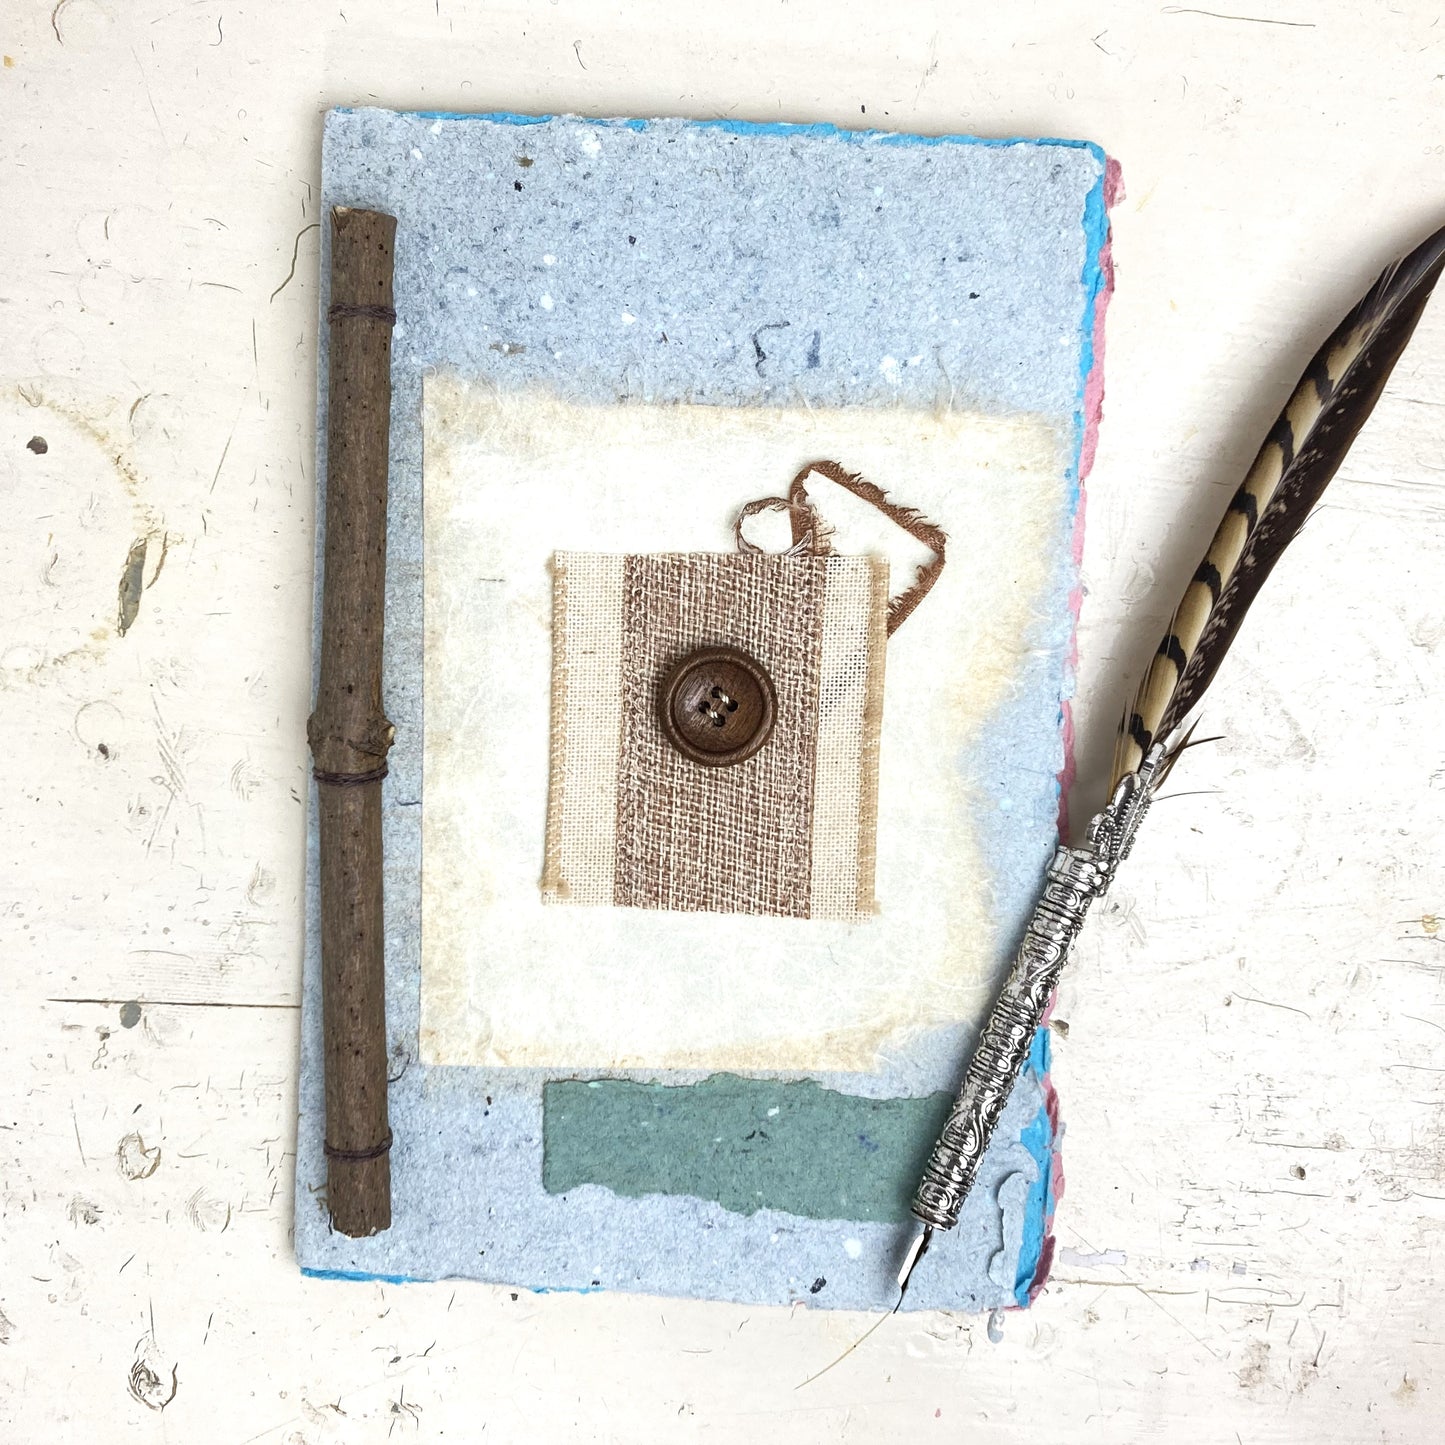 Art Journal with Handmade Paper Cover, Featuring Vintage-Style Button on Cover, Variety of Mixed Media Pages, Hand Sewn Binding with Stick